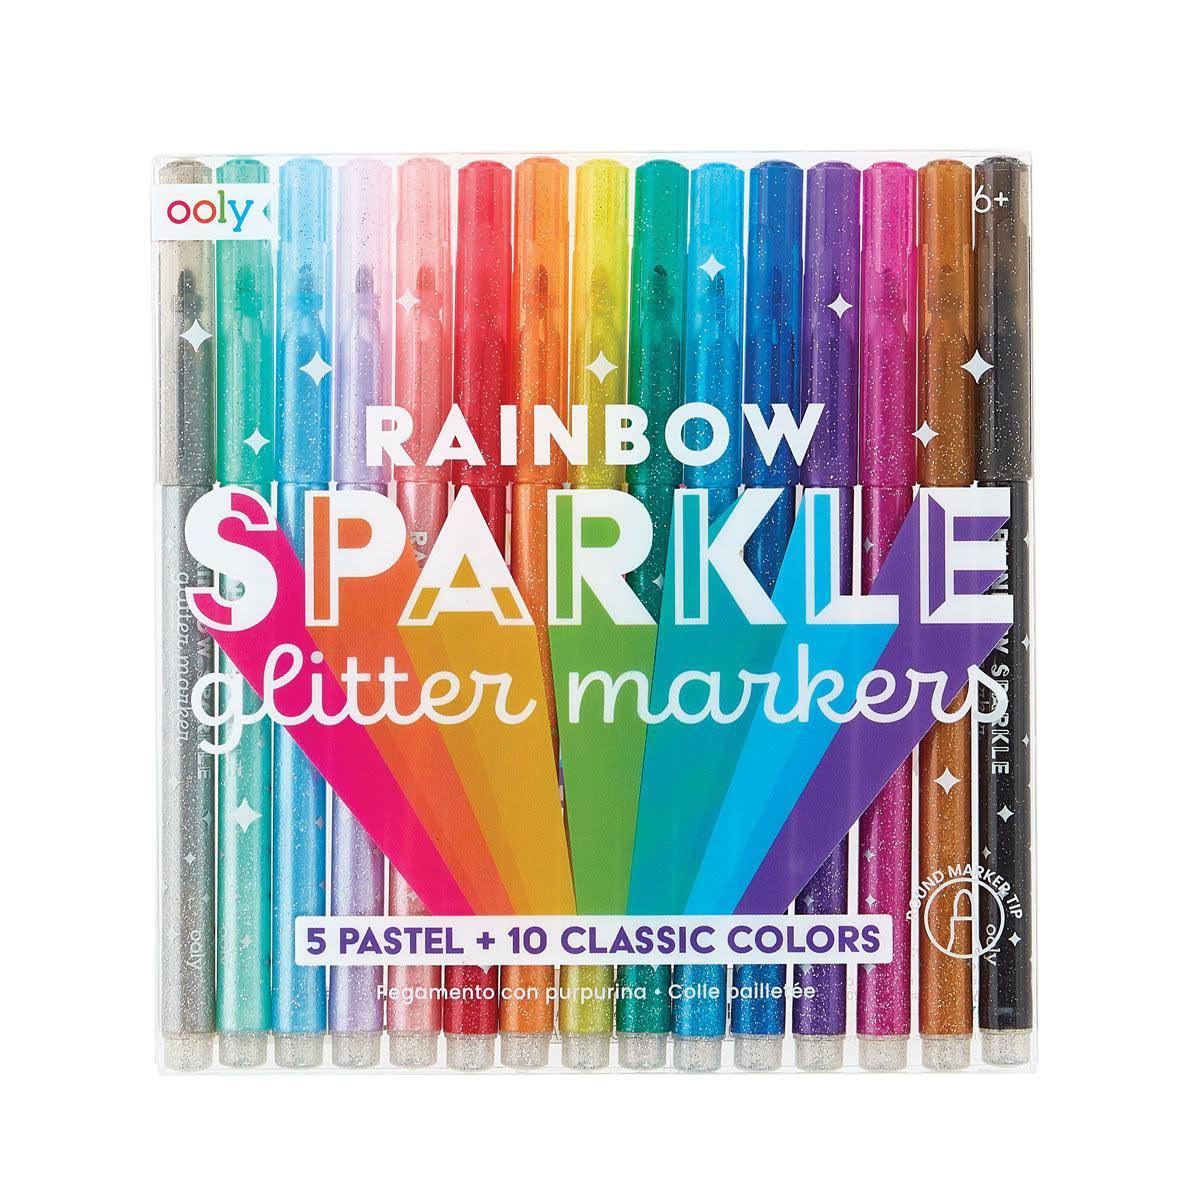 Ooly Rainbow Sparkle Glitter Markers 15 Pack